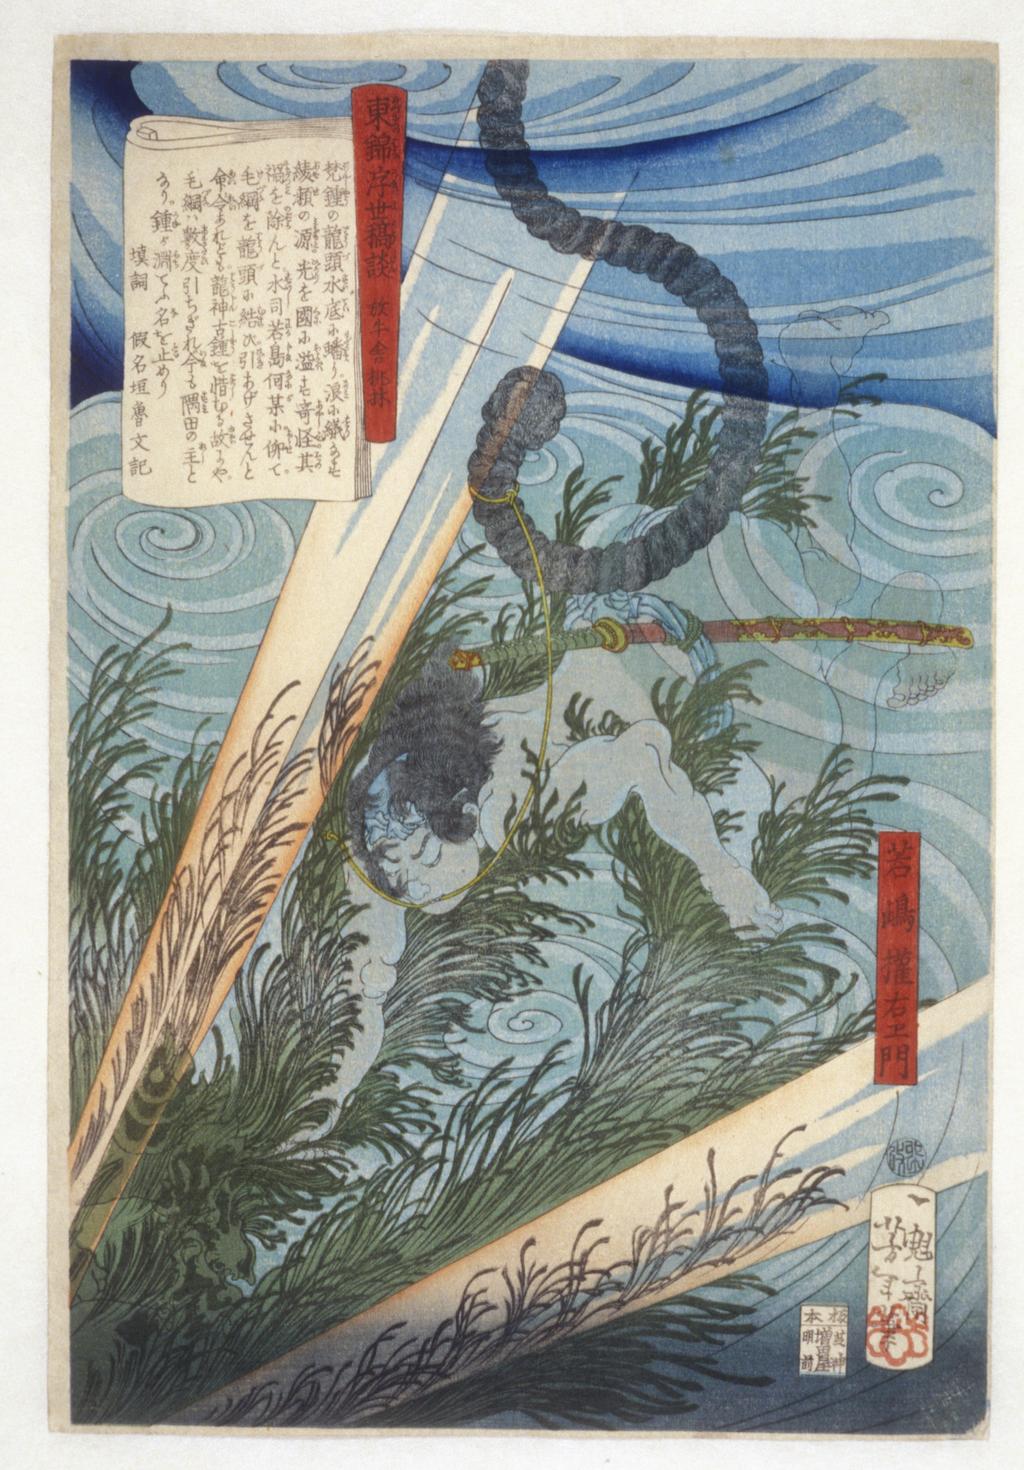 An image of Wakashima Gonemon and the Bell, from the series Tales of the floating world on eastern brocade (Azuma no nishiki ukiyo kôdan). Yoshitoshi, Tsukioka (Japanese, 1839-1892). Colour print from woodblocks. Ôban. Publisher: Masudaya. 1867. Acquisition Credit: Purchased from the Rylands Fund with a contribution from the National Art Collections Fund.